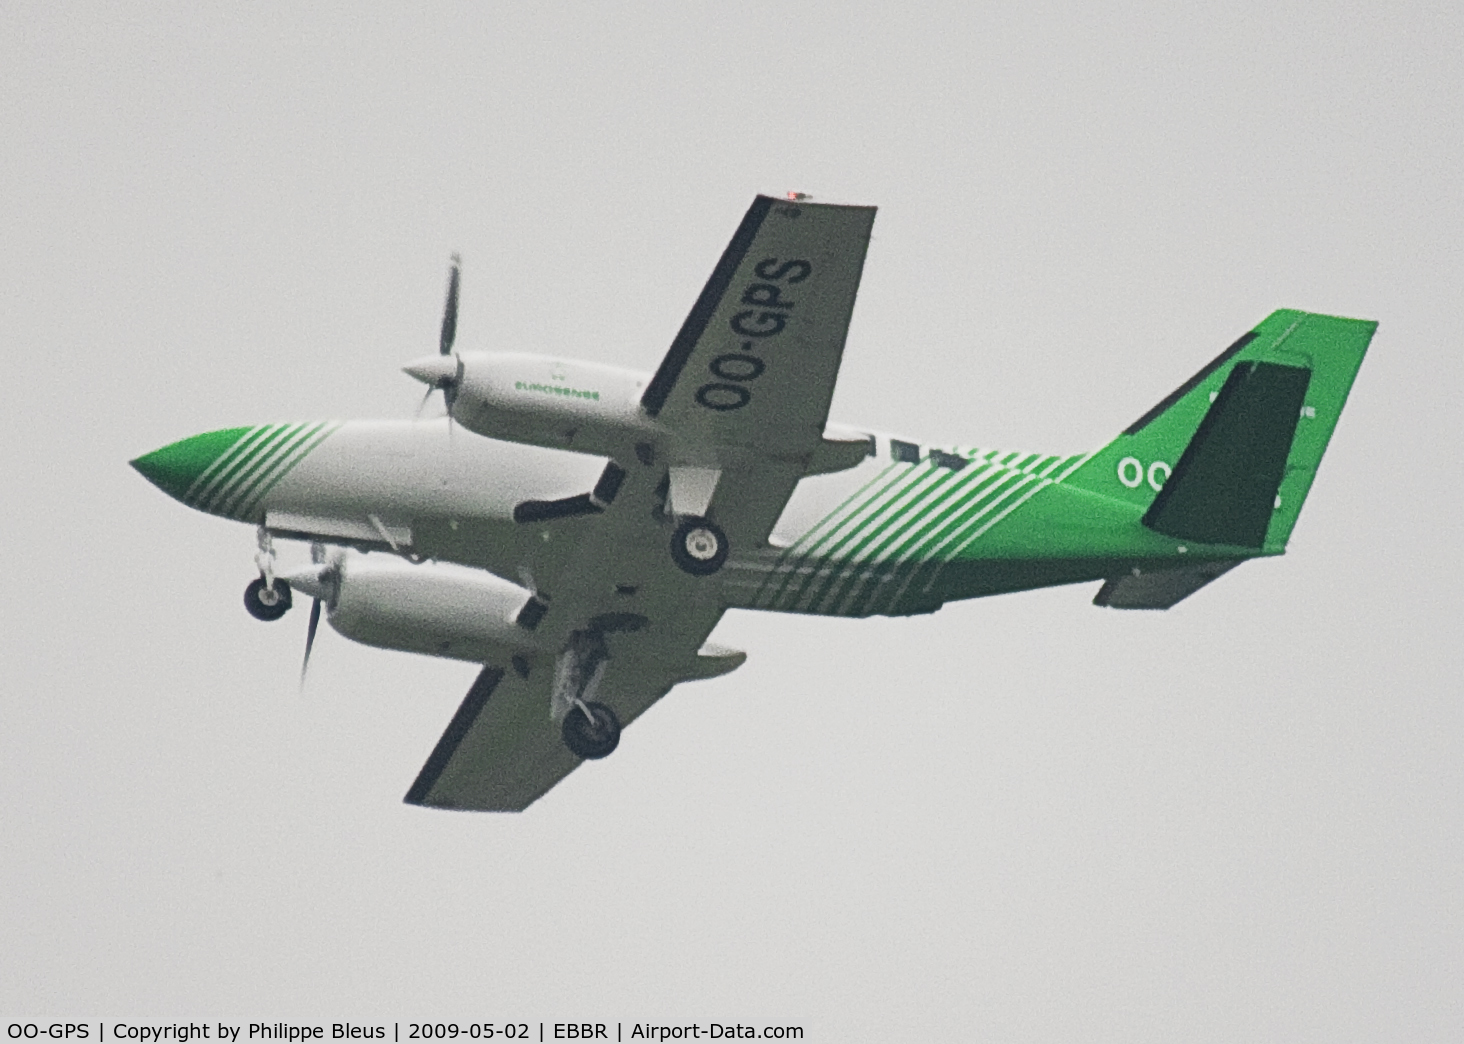 OO-GPS, 1980 Cessna 404 Titan Titan C/N 404-0609, This green little twin turbo prop is mainly used for geo-information. Rising from rwy 25R aon a gloomy morning.